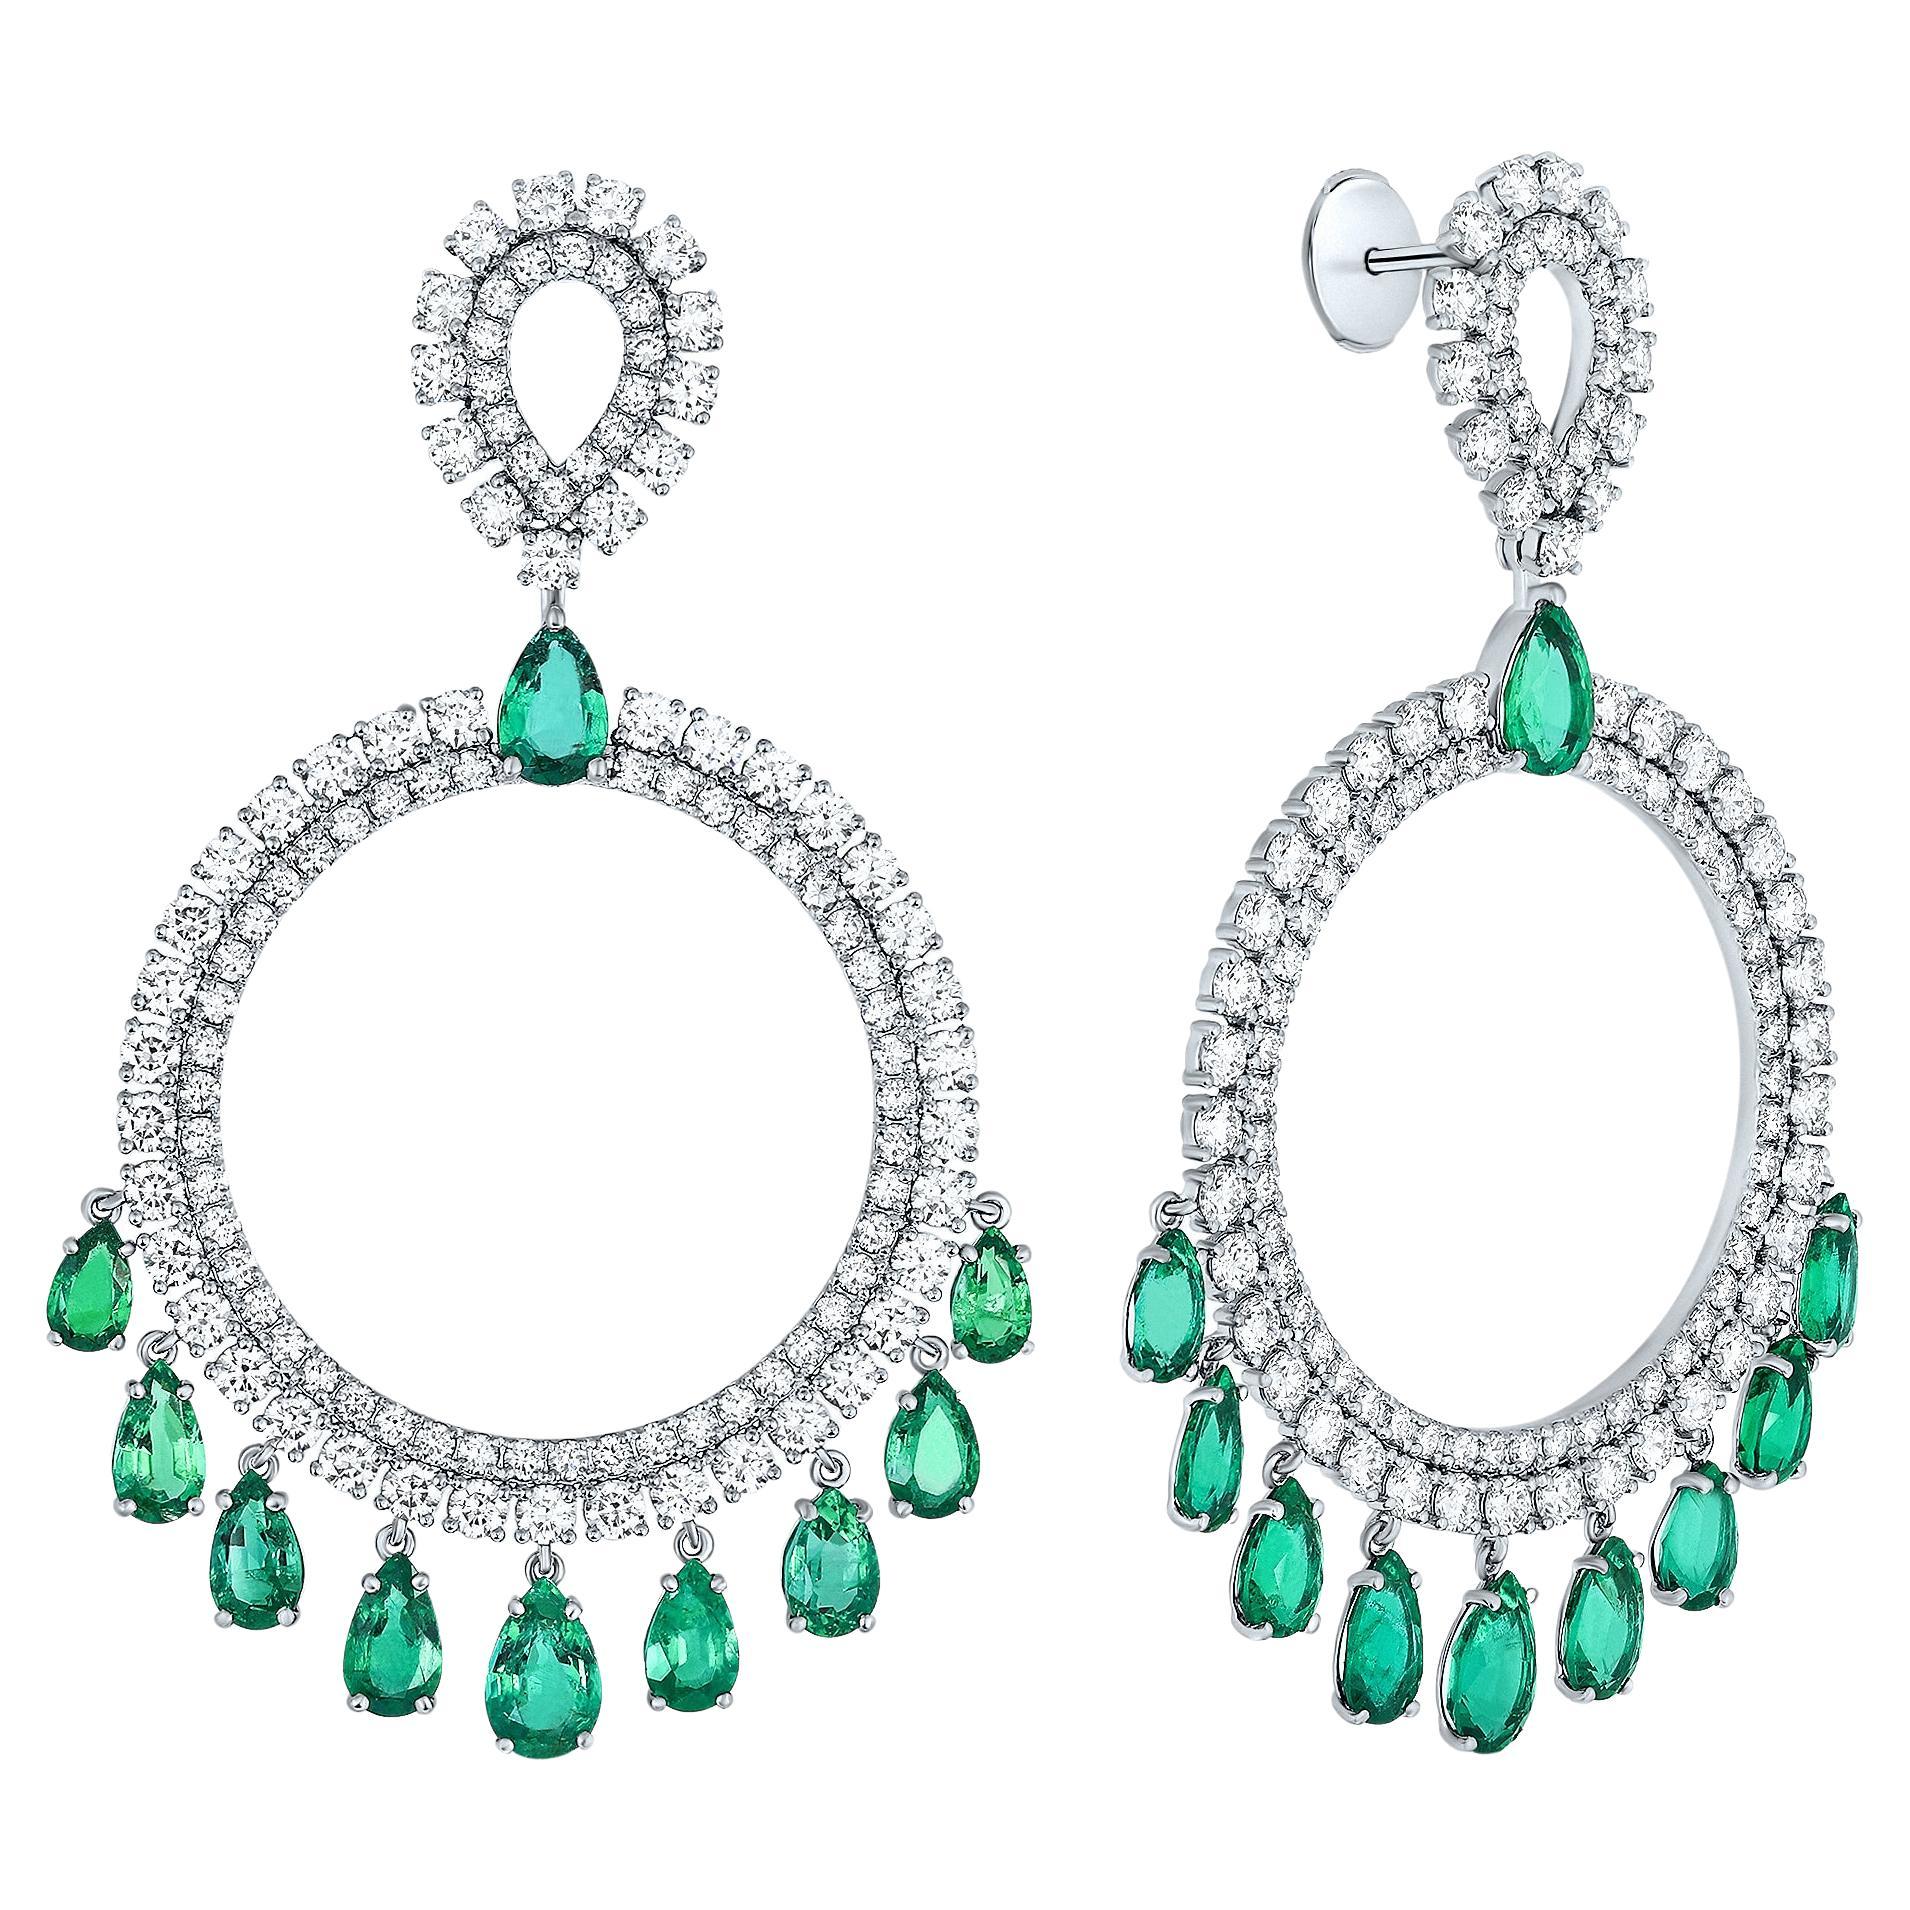 17.59 Carat White Diamond and Emerald Chandelier Drop Earring set in 18k Gold. For Sale